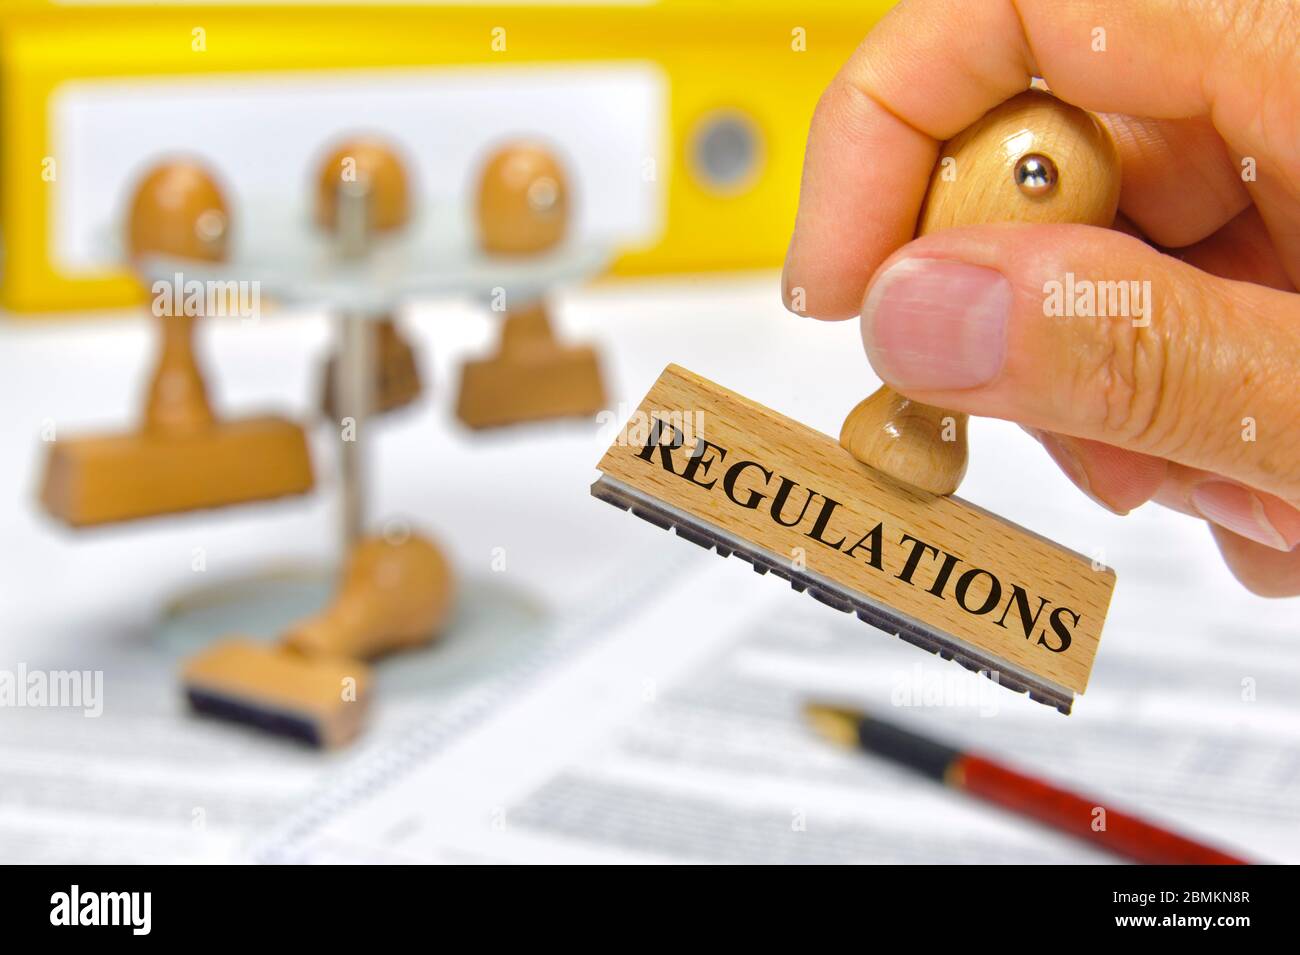 regulations printed on rubber stamp Stock Photo